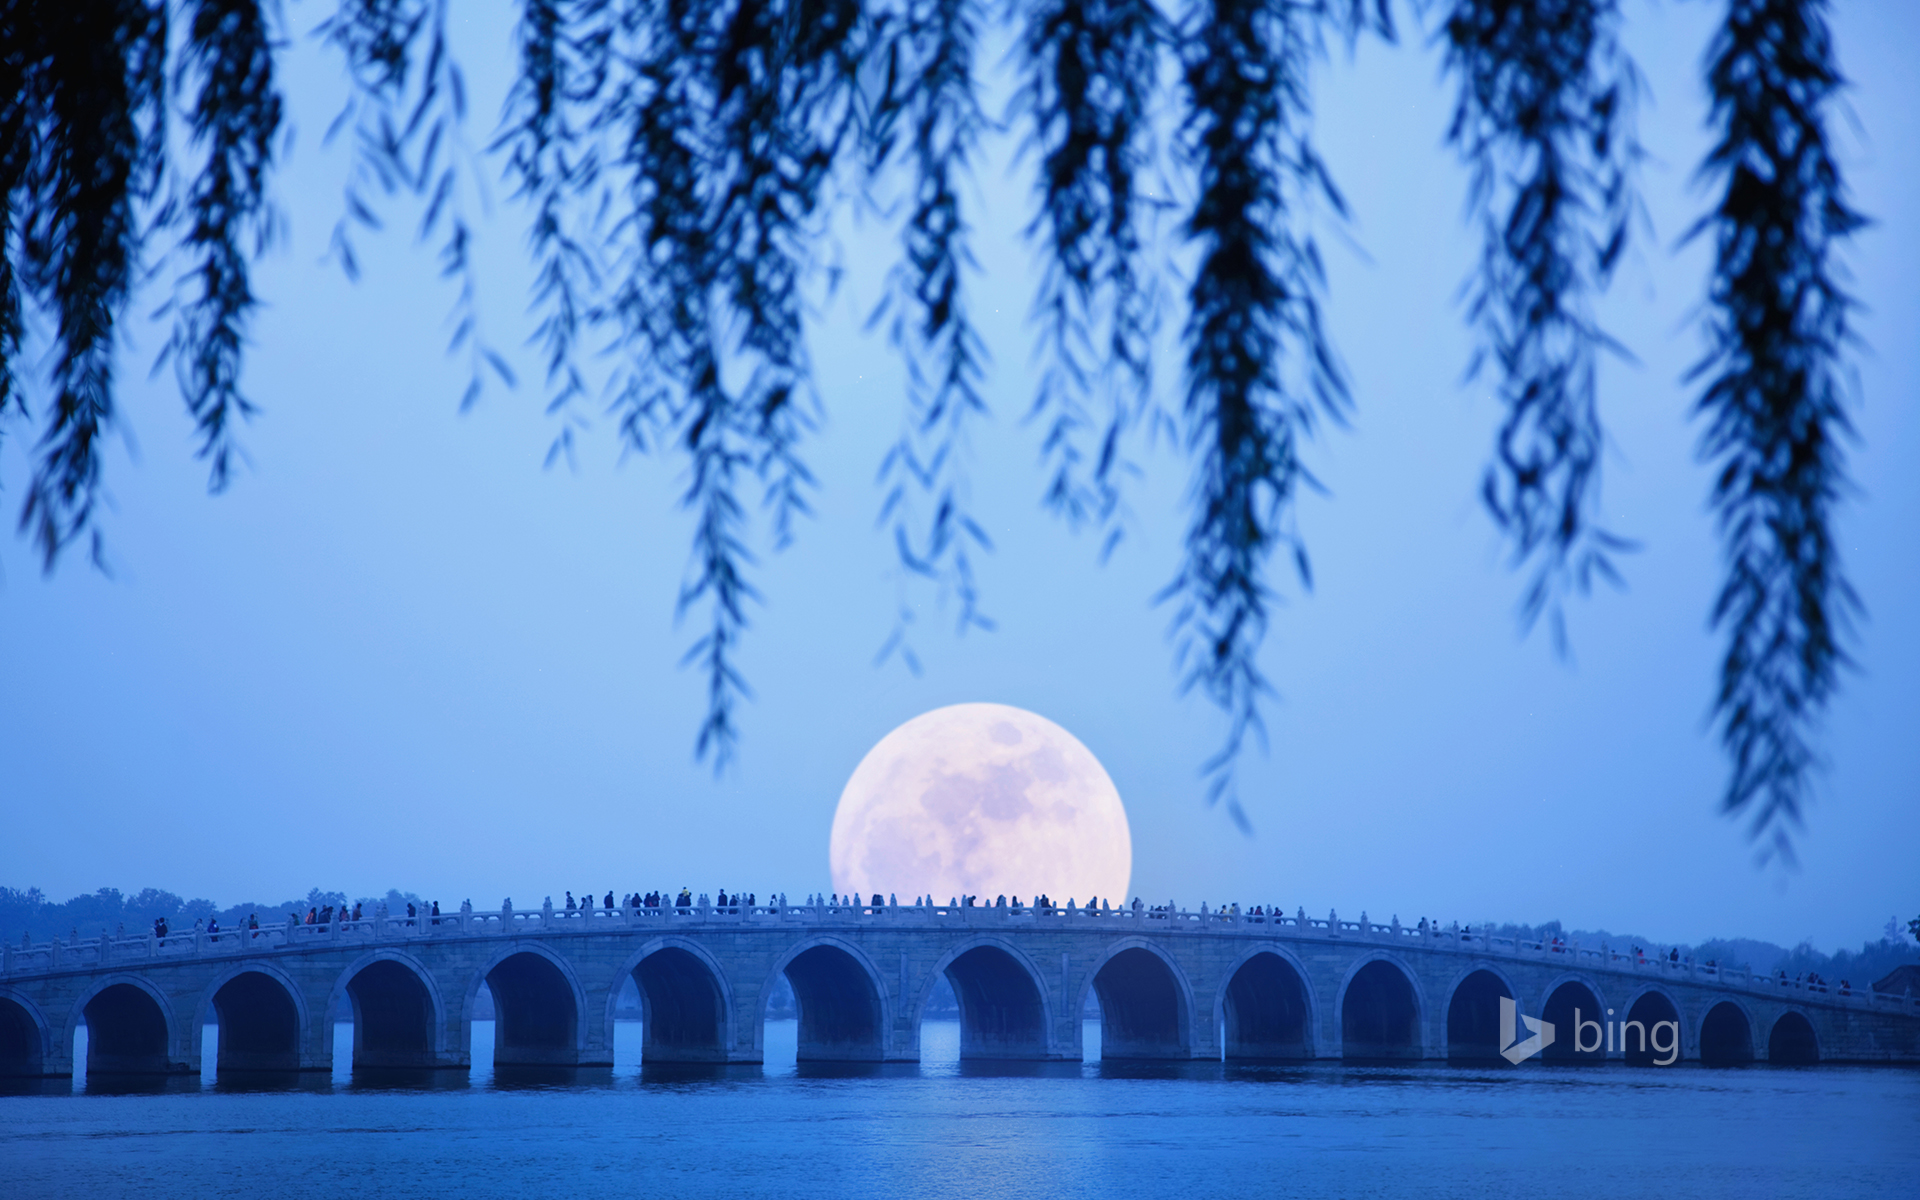 Moonrise over Seventeen Arch Bridge on Kunming Lake at the Summer Palace in Beijing, China